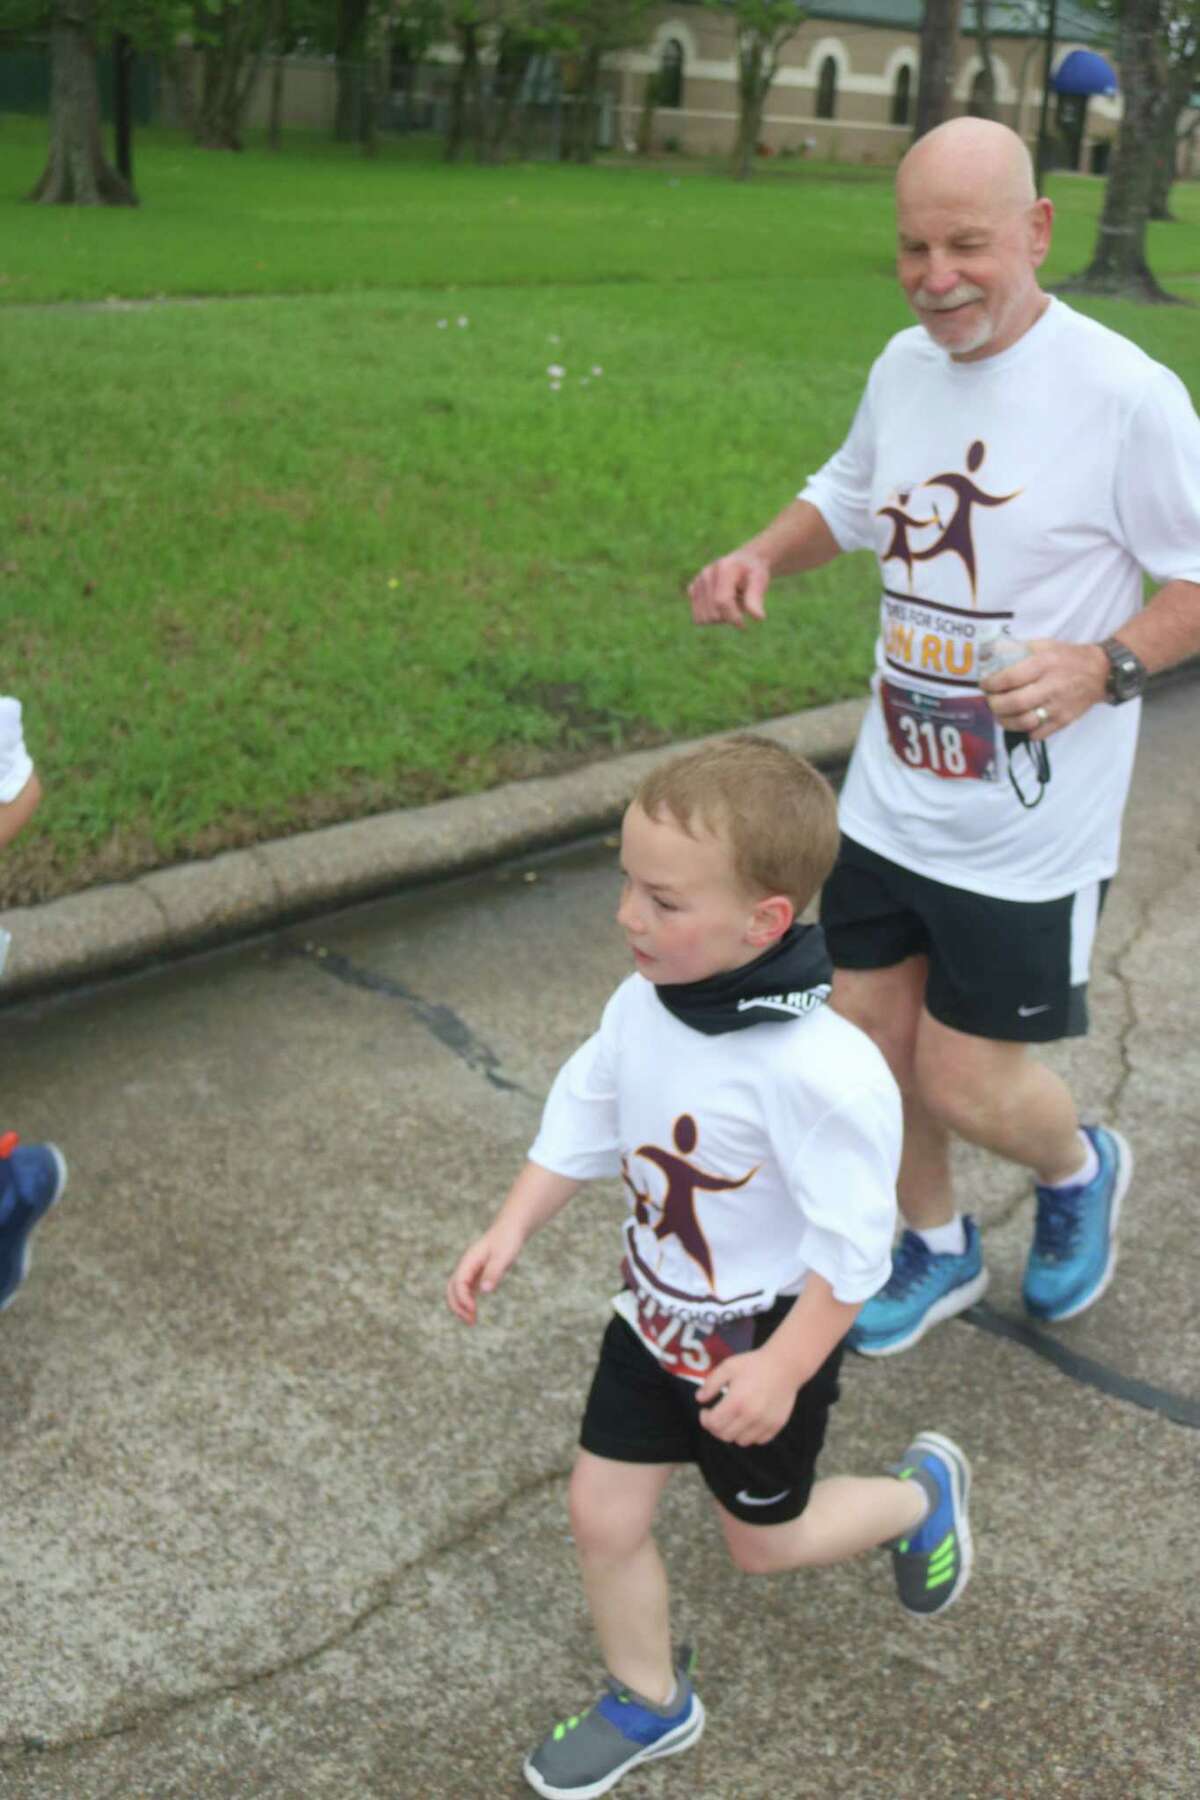 The 13th annual Strides for Schools Fun Run on April 30 is one of several fundraising outdoor activities planned in Deer Park that month.